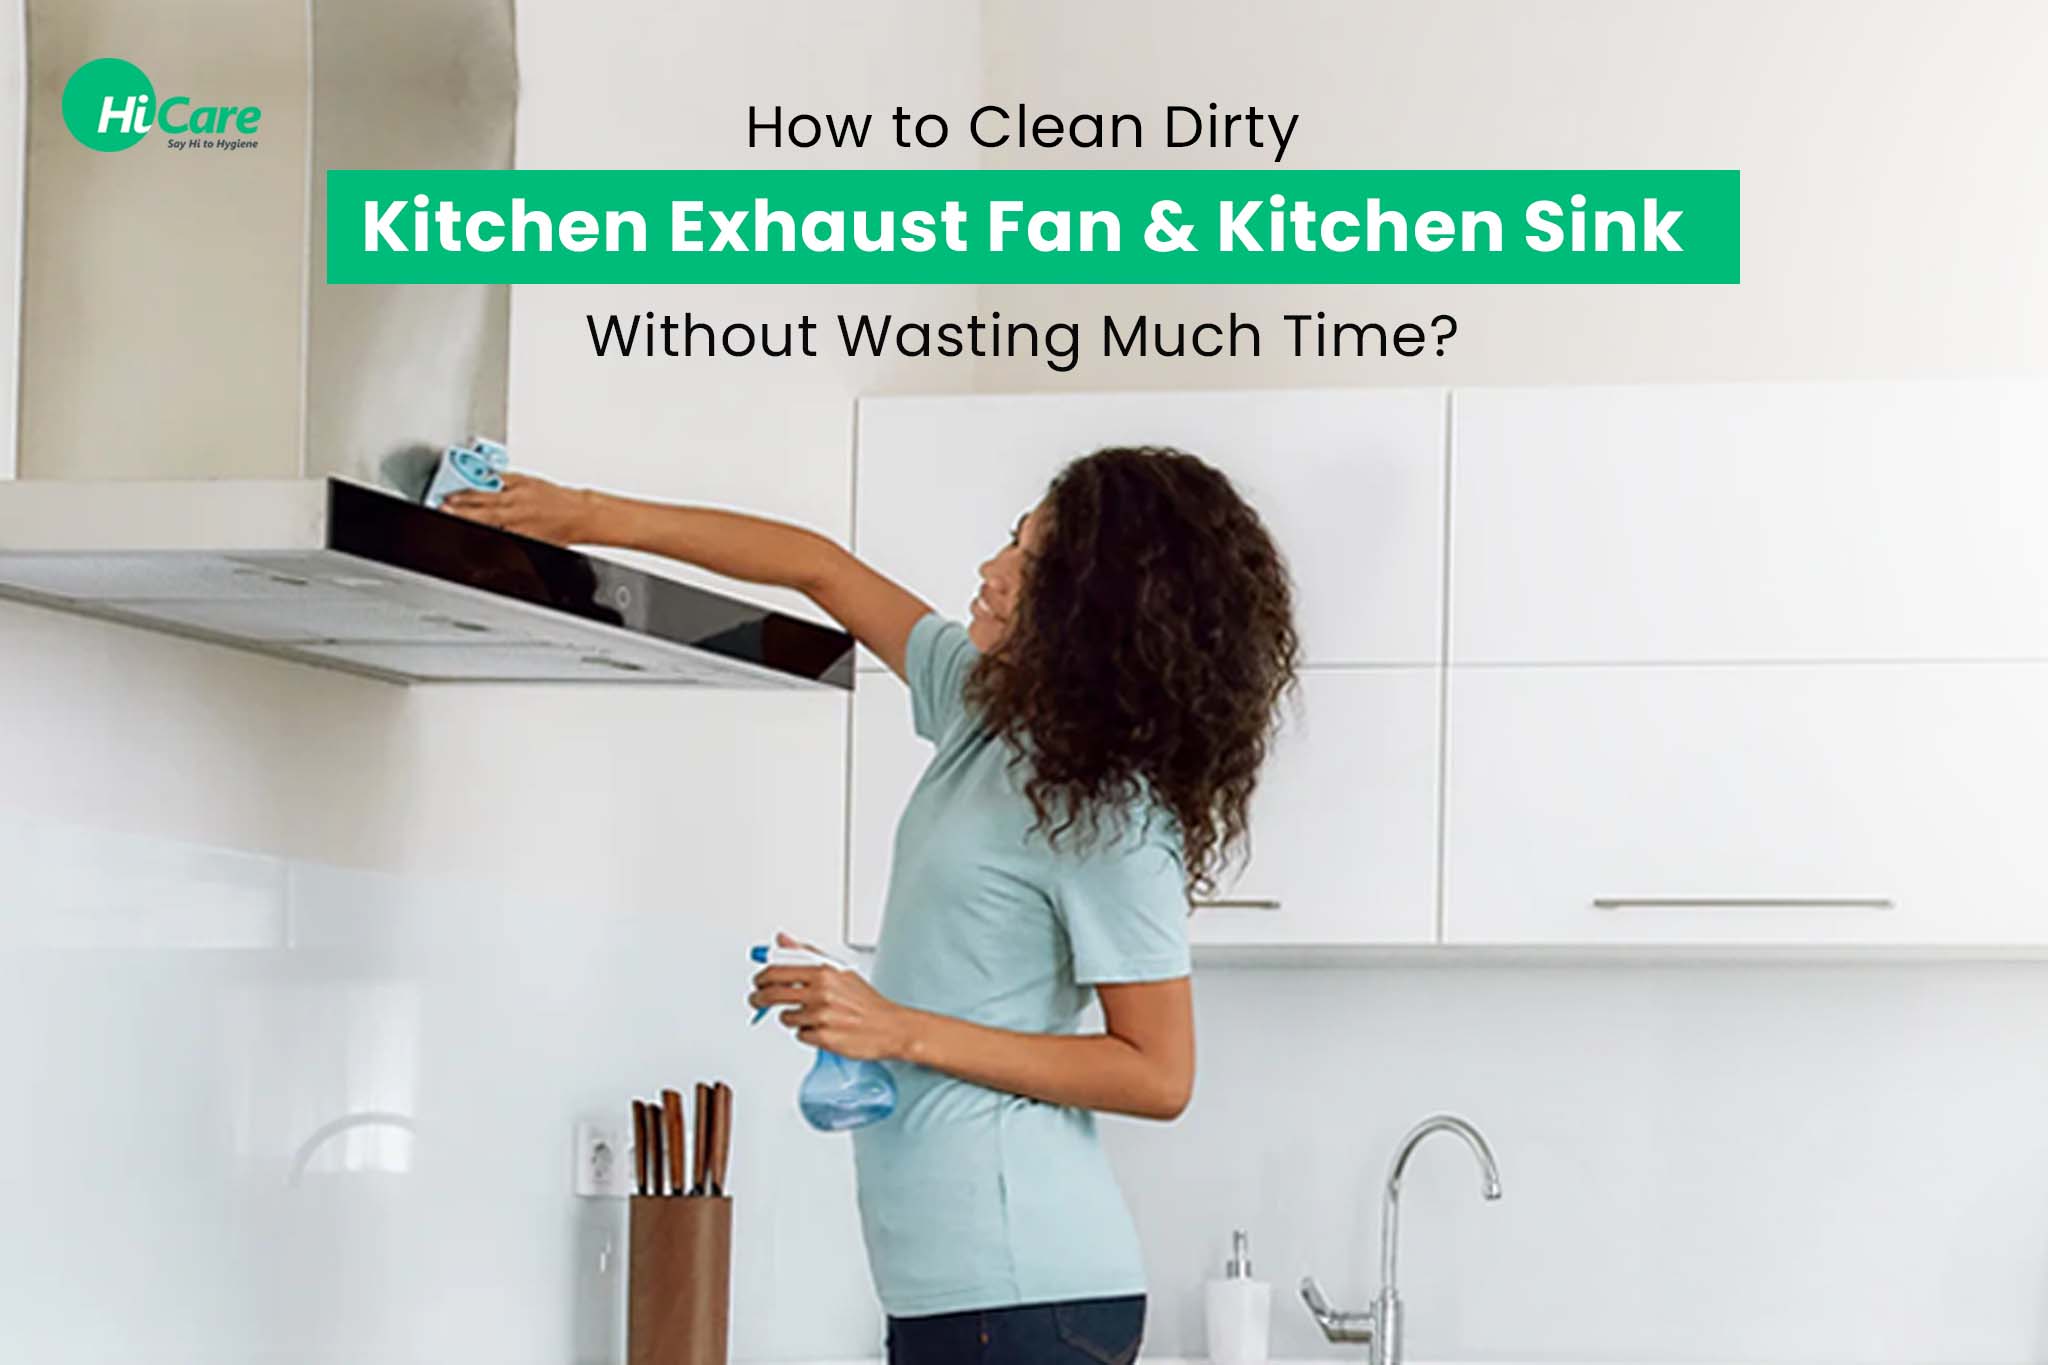 How to Clean Dirty Kitchen Exhaust Fan and Kitchen Sink Without Wasting Much Time?